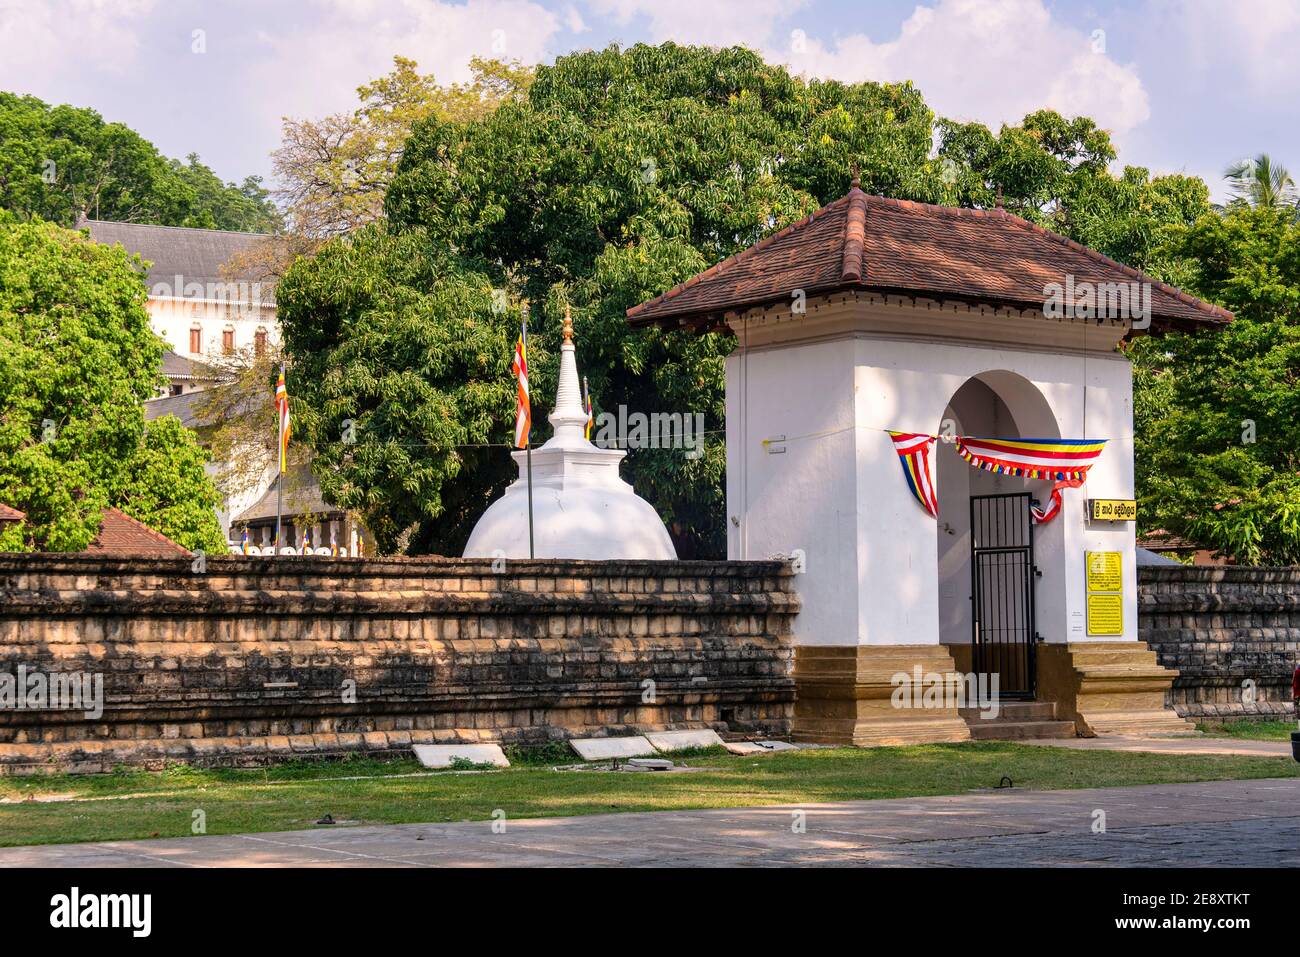 Kandy, Temple of the Tooth, exterior Architecture. Stock Photo